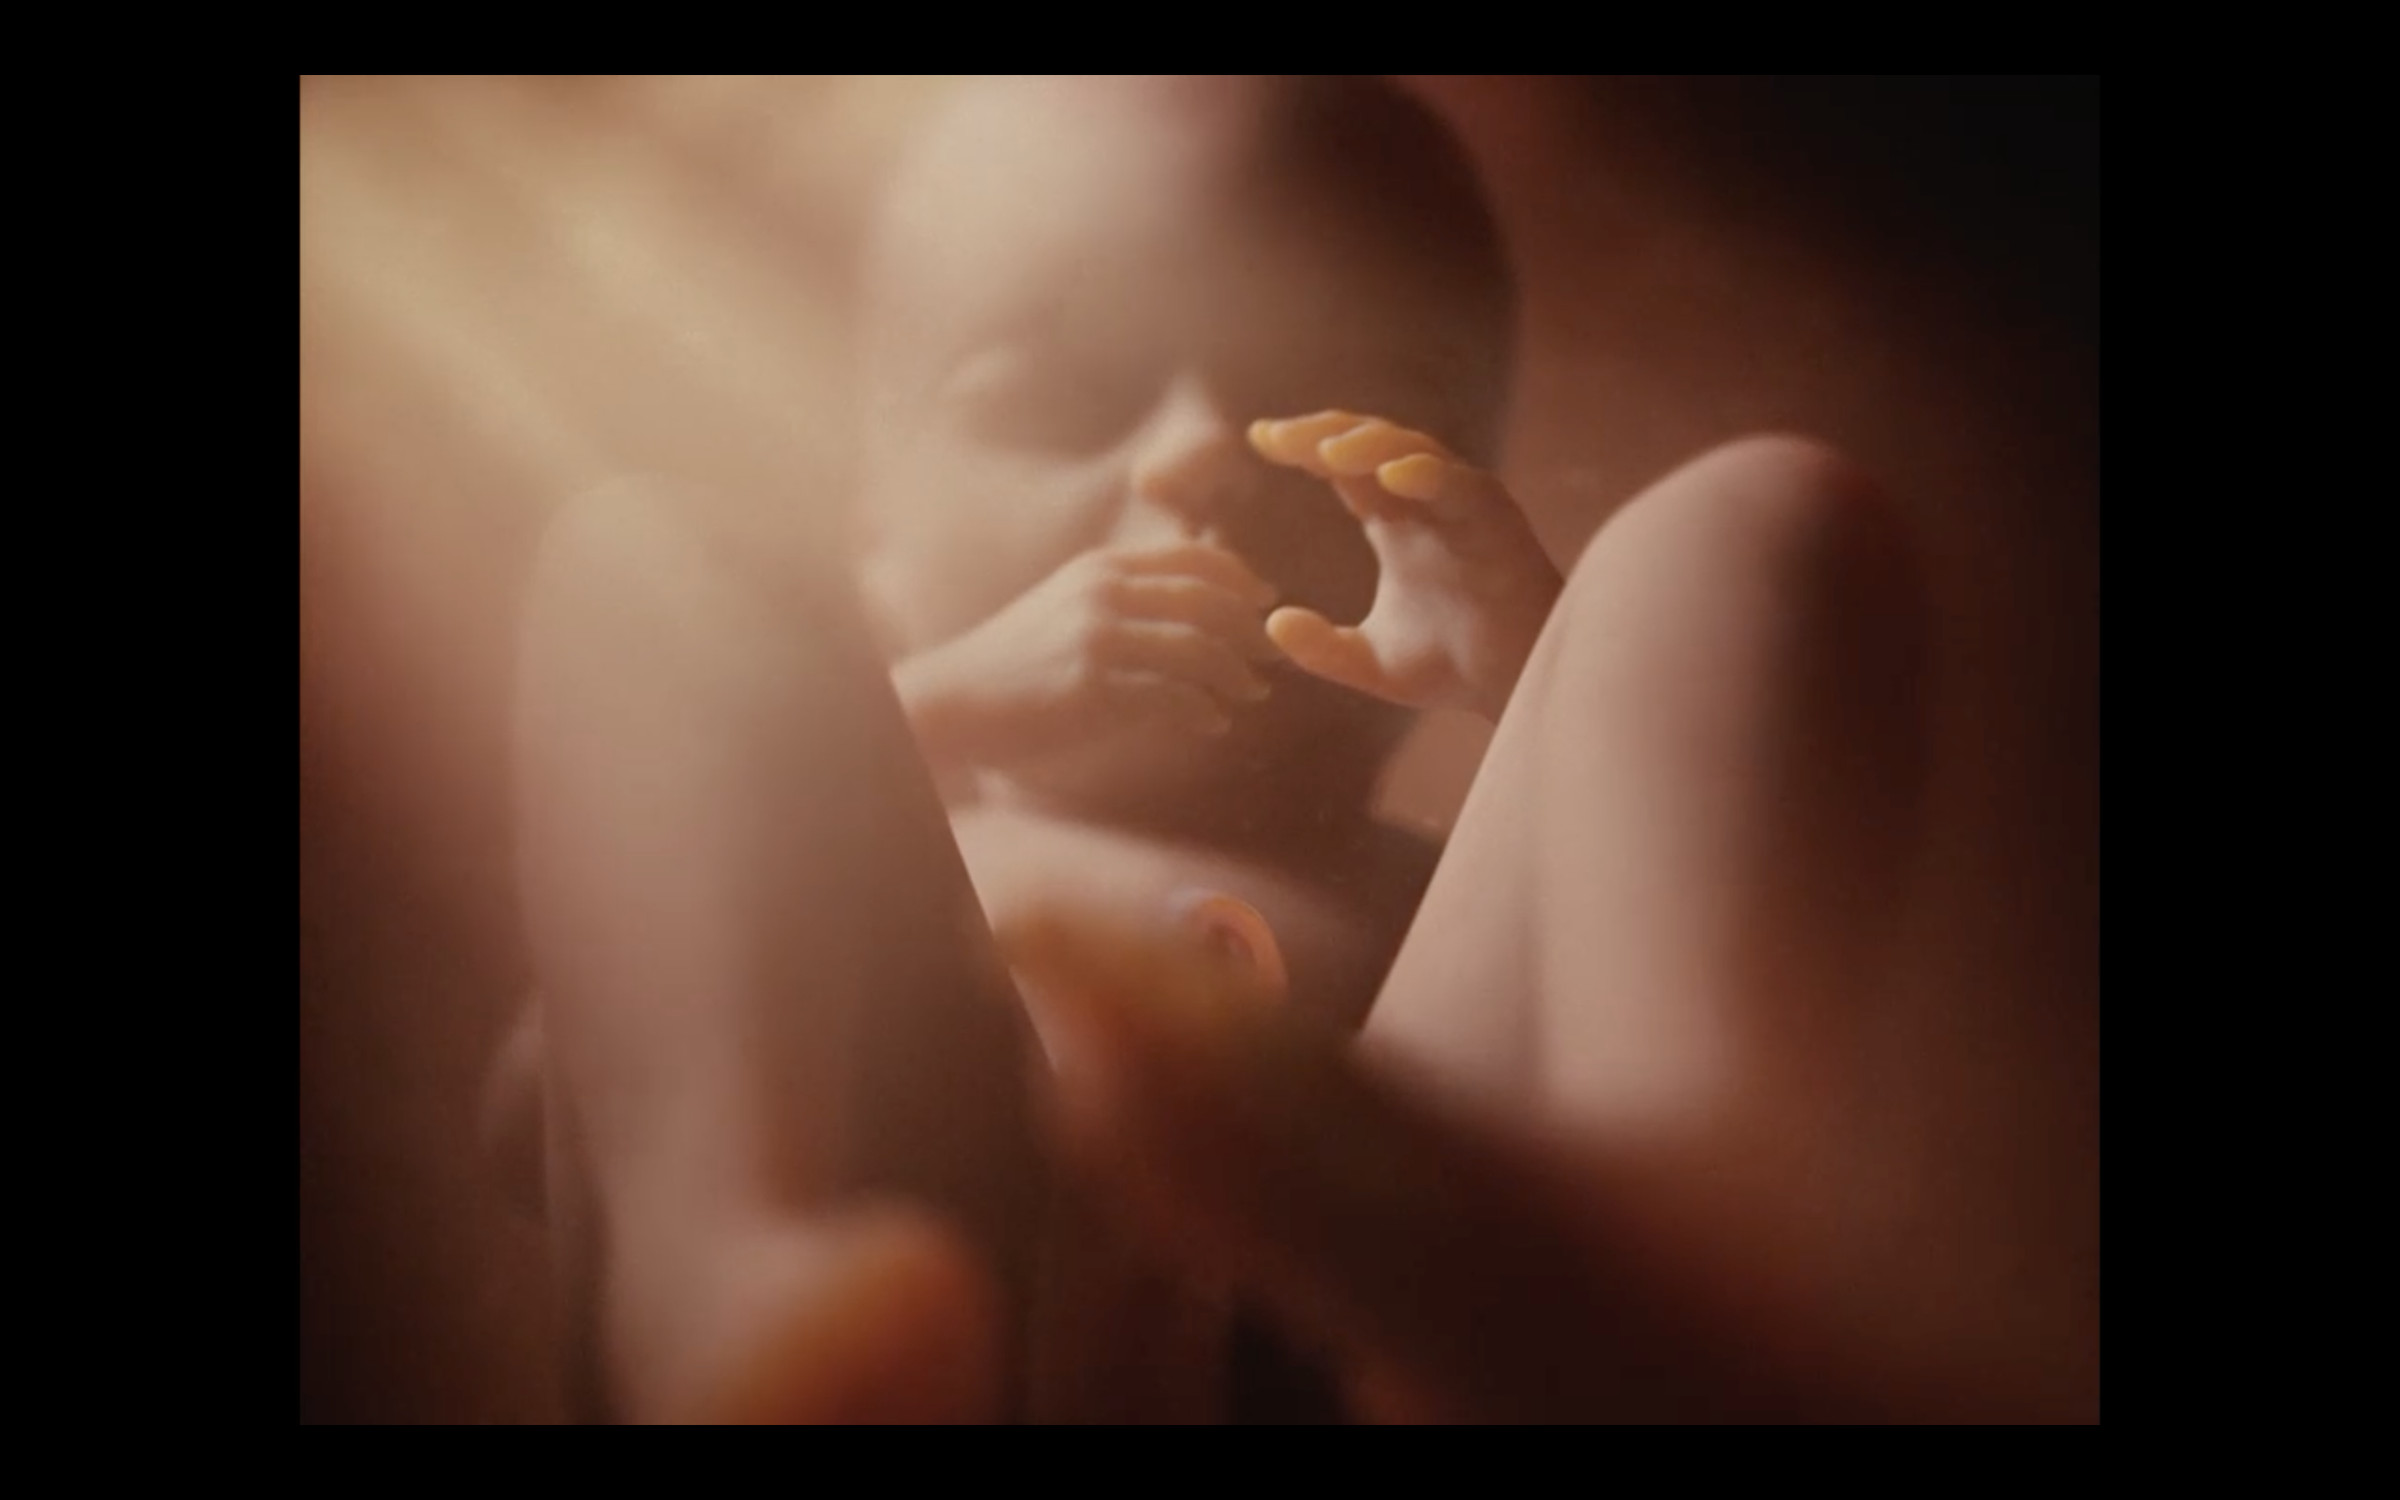 A CI fetus in a fetal position depicted in an unnaturally well-lit CG womb.